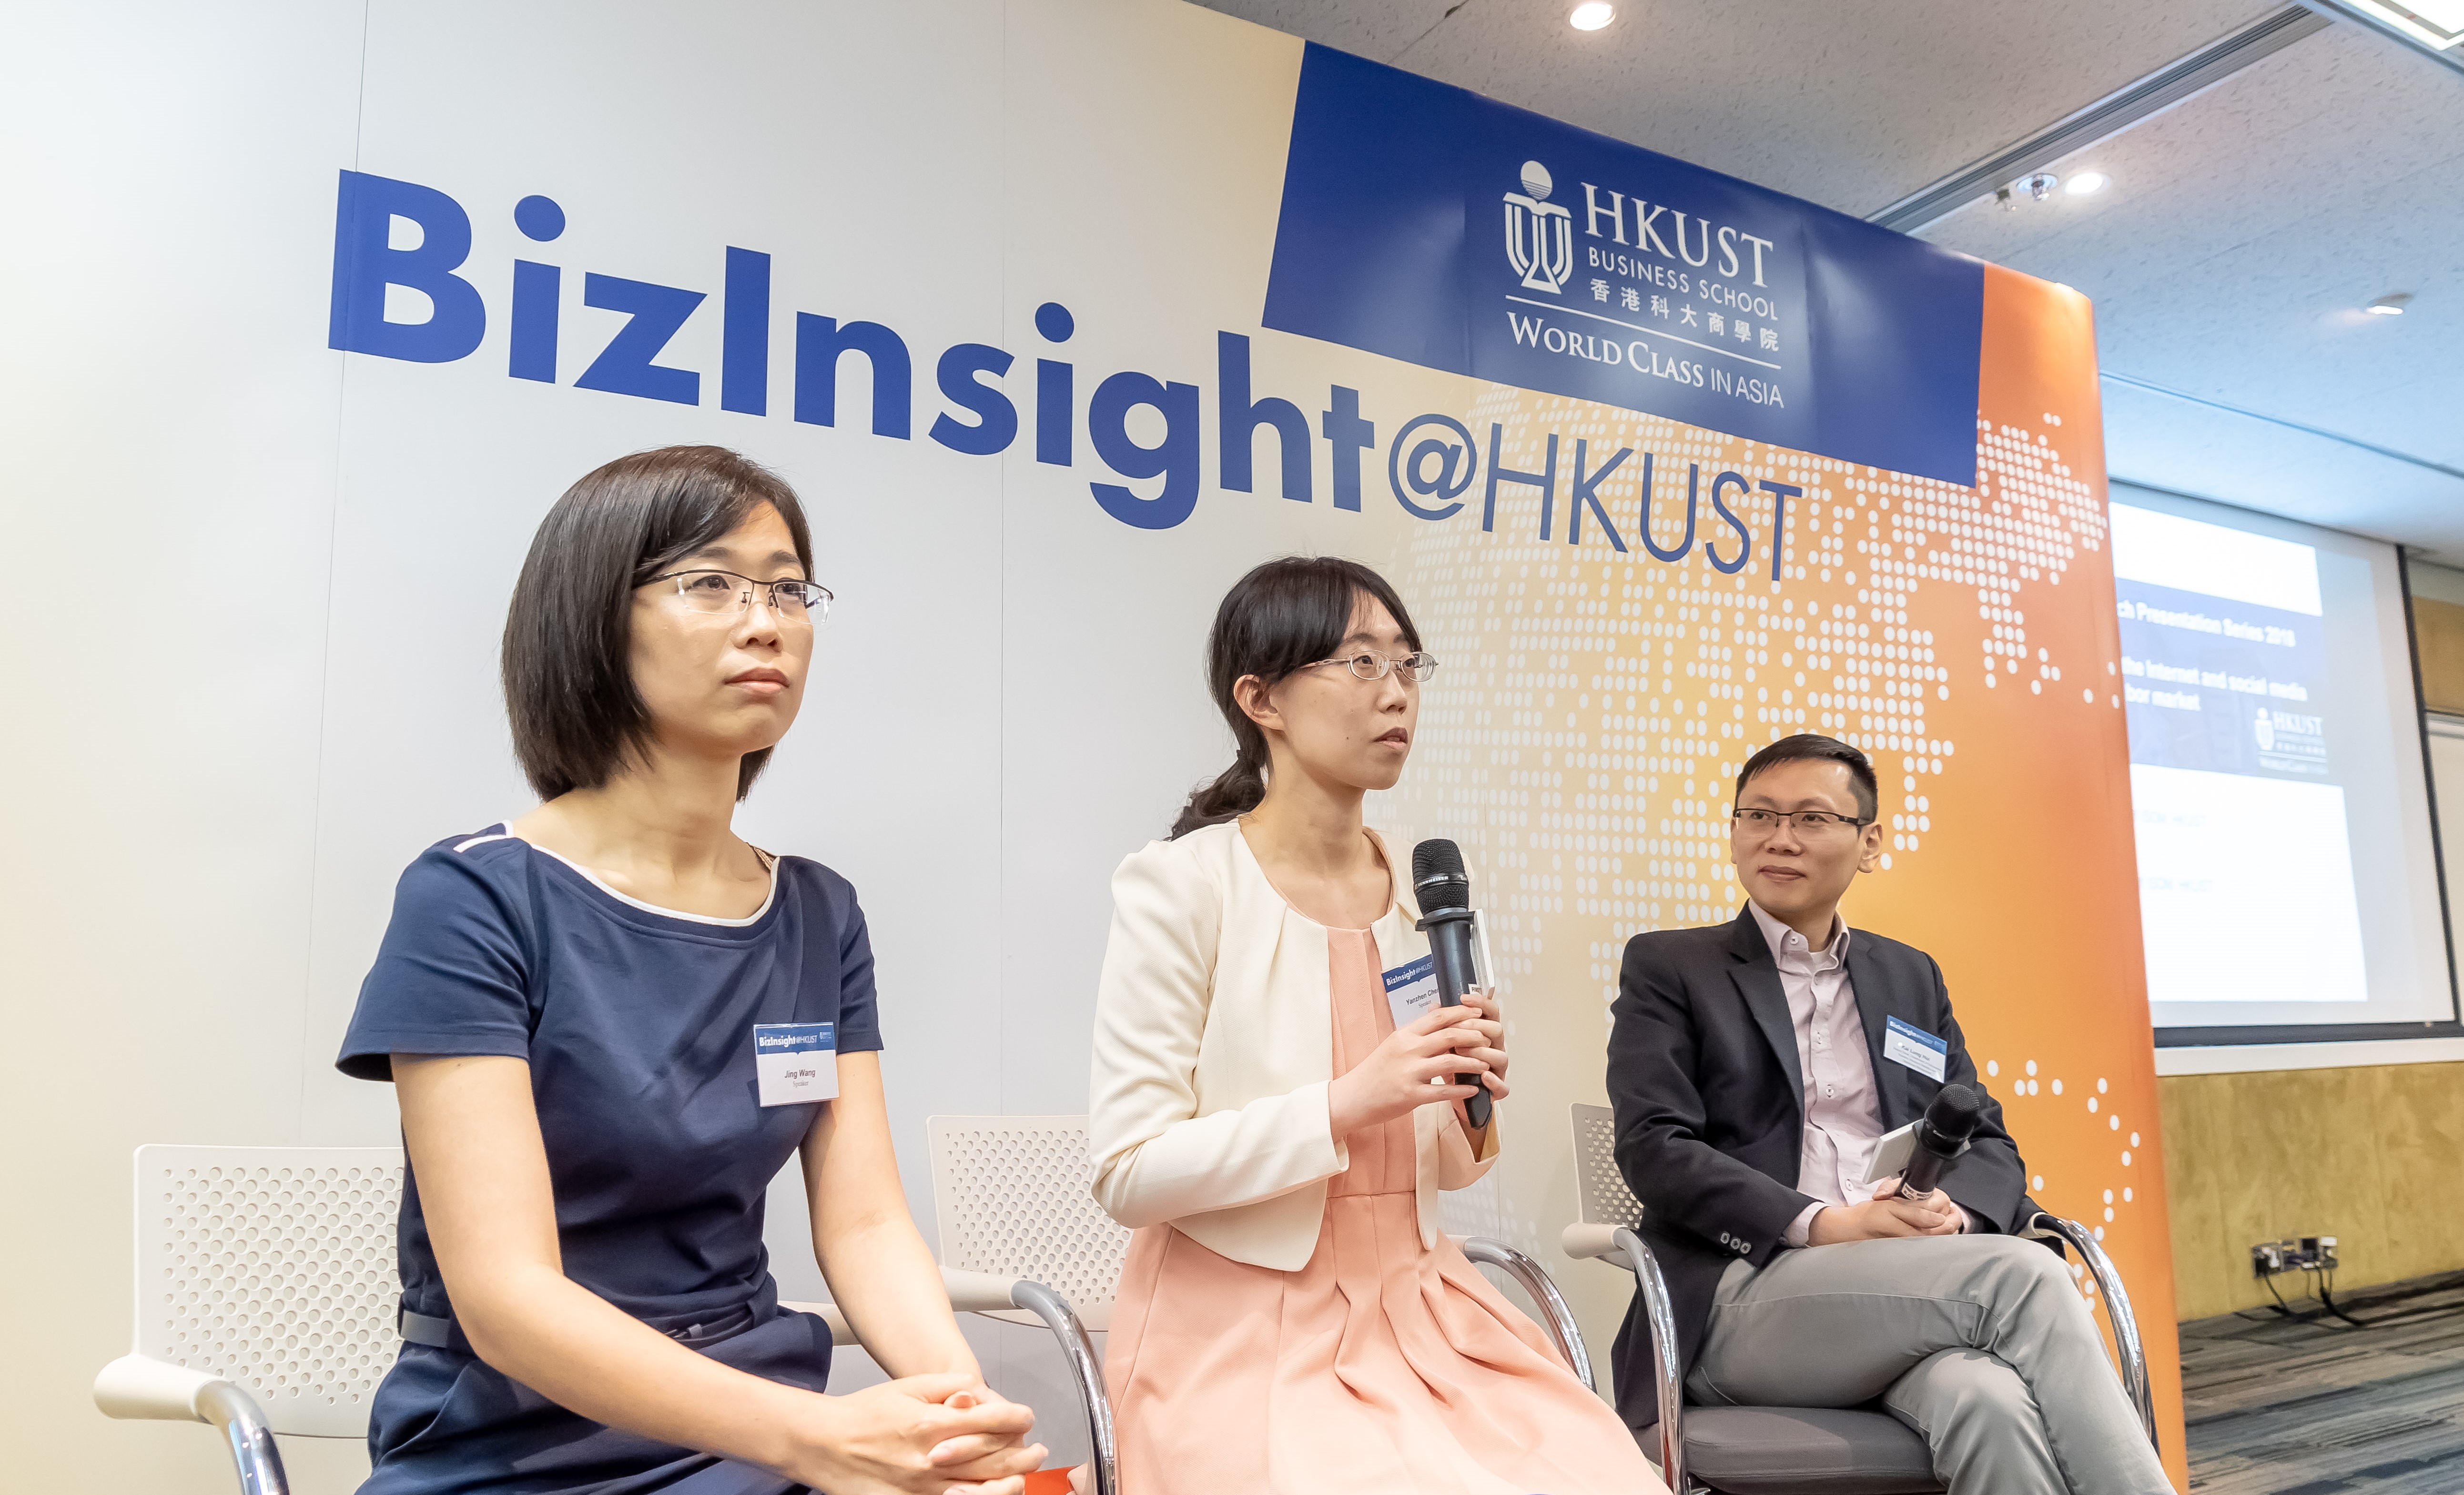 HKUST Business School shares insights on how the development of the Internet and social media has affected the online labour market in the BizInsight@HKUST Presentation Series. The talk was moderated by Prof Hui Kai-Lung, Deputy Head of Department of Information Systems, Business Statistics and Operations Management.